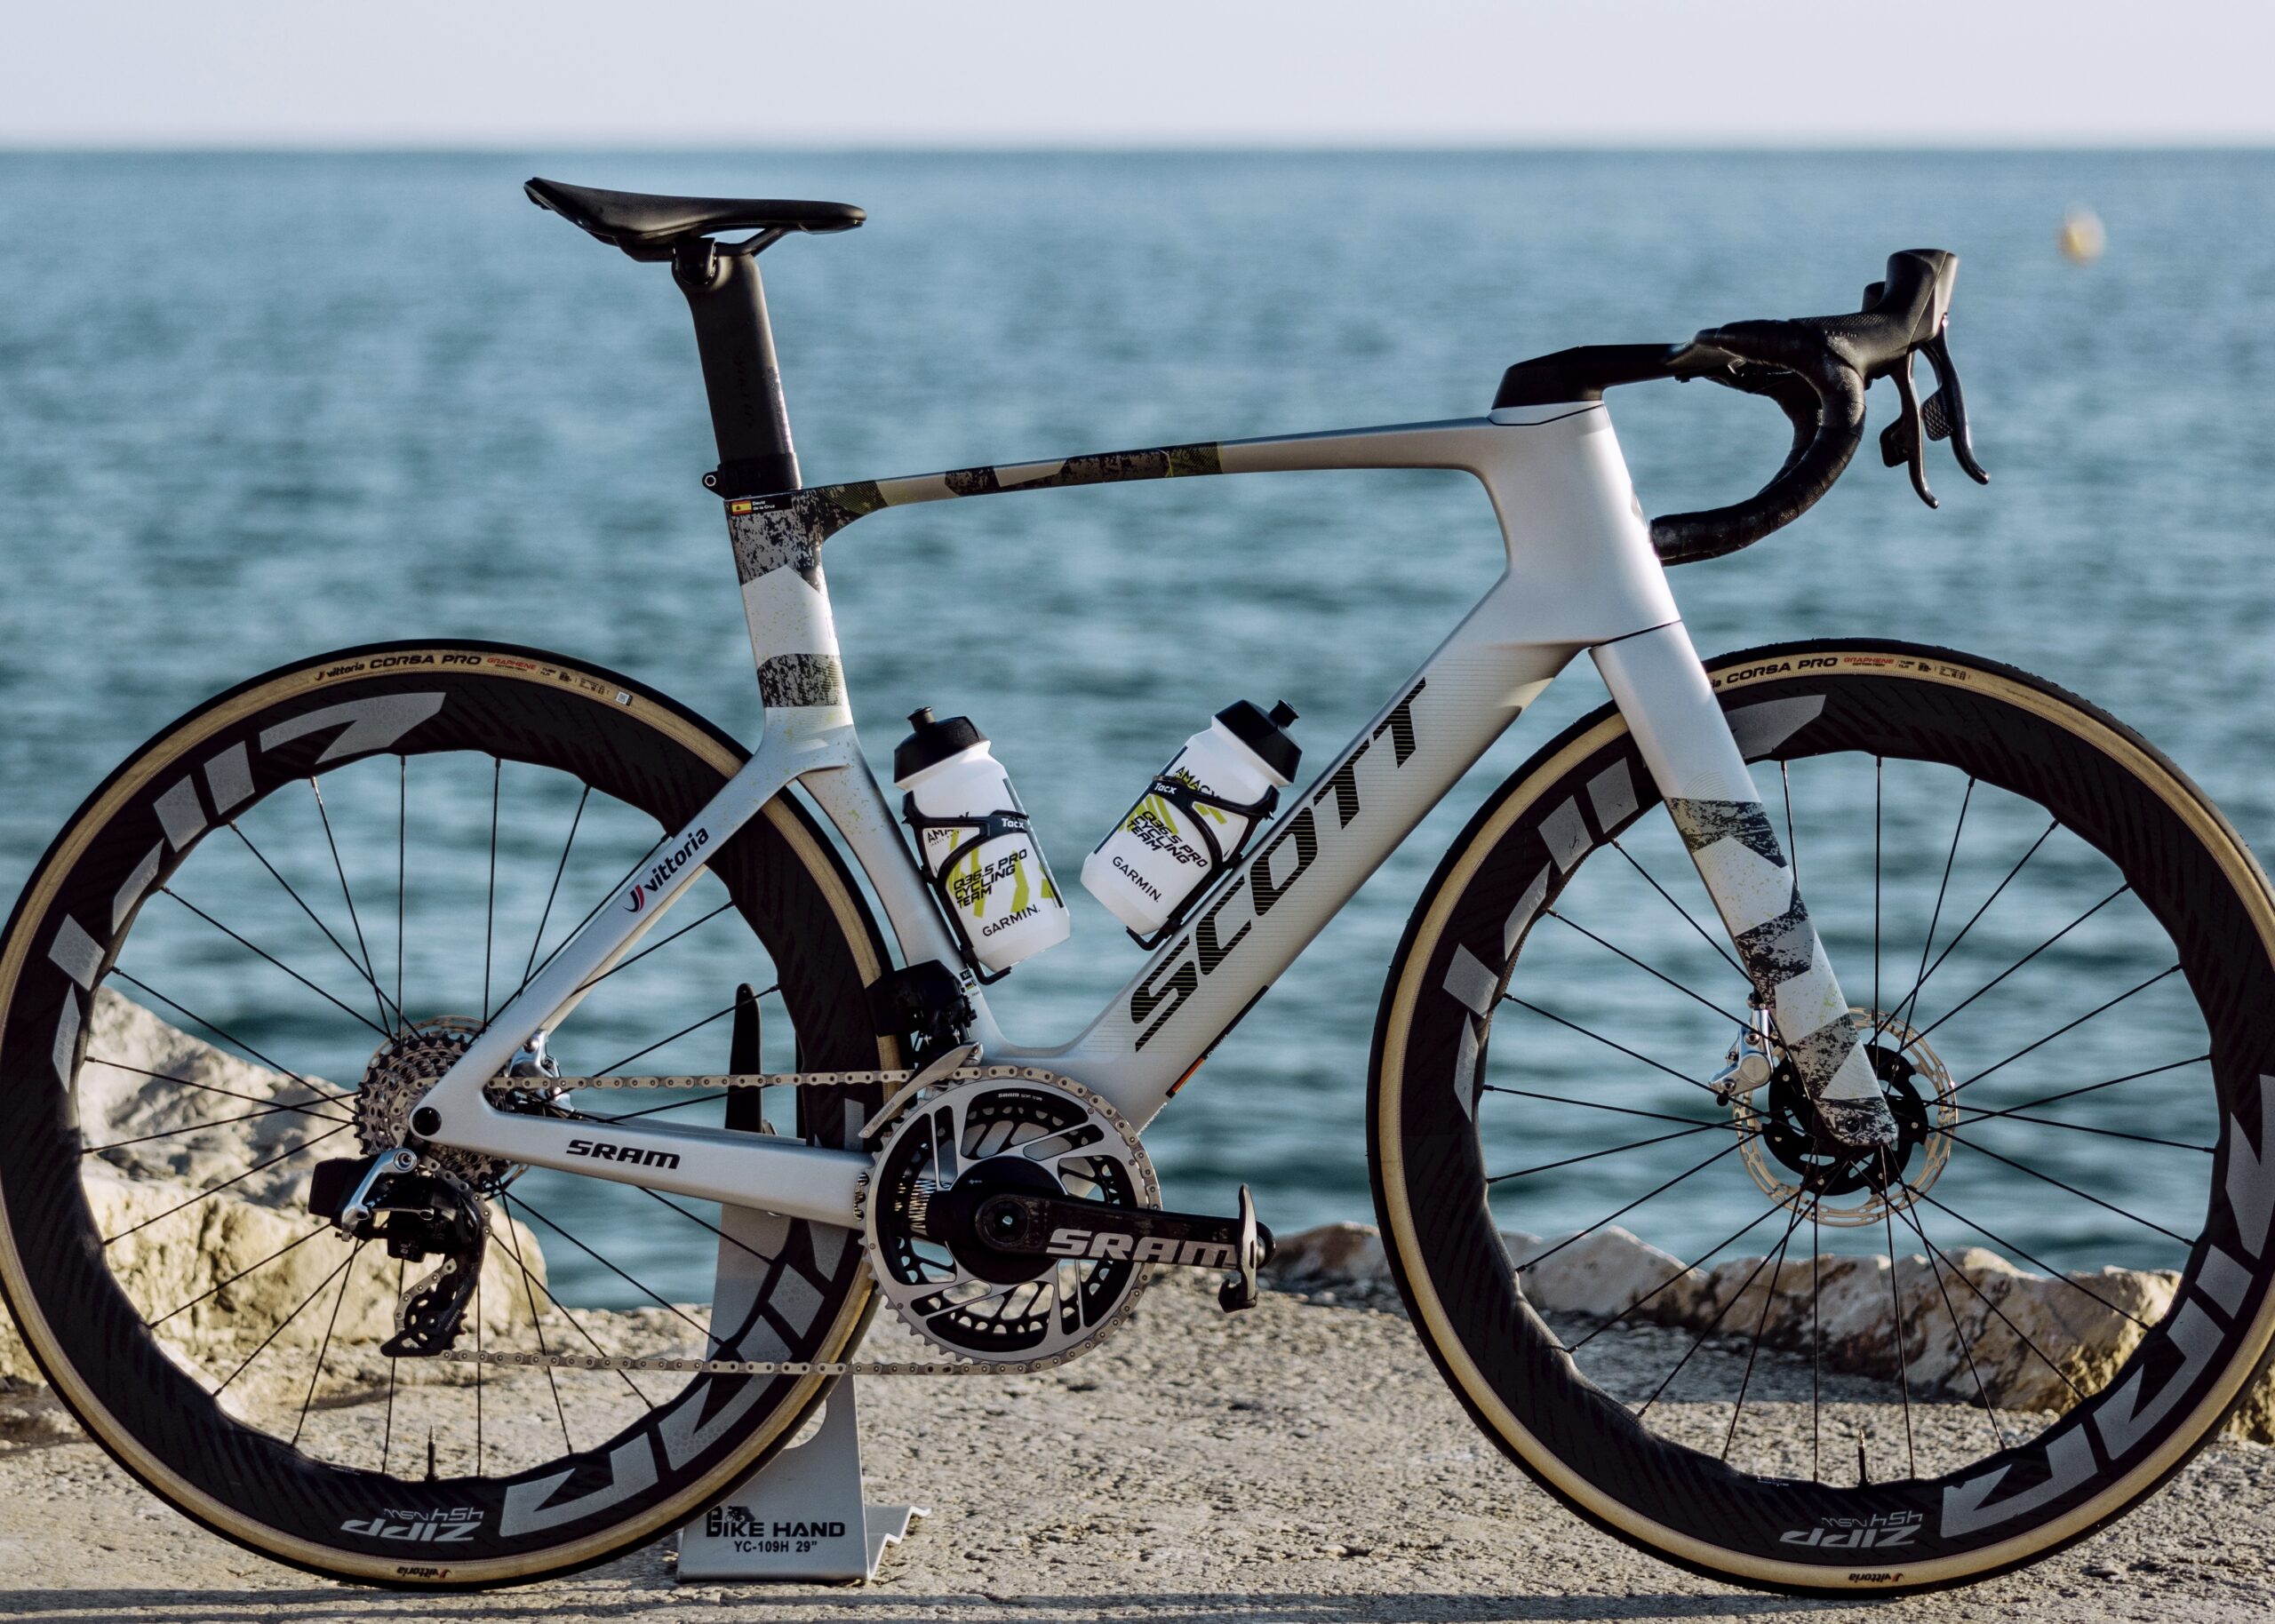 Vittoria joins forces with Q36.5 Pro Cycling Team for the upcoming 202